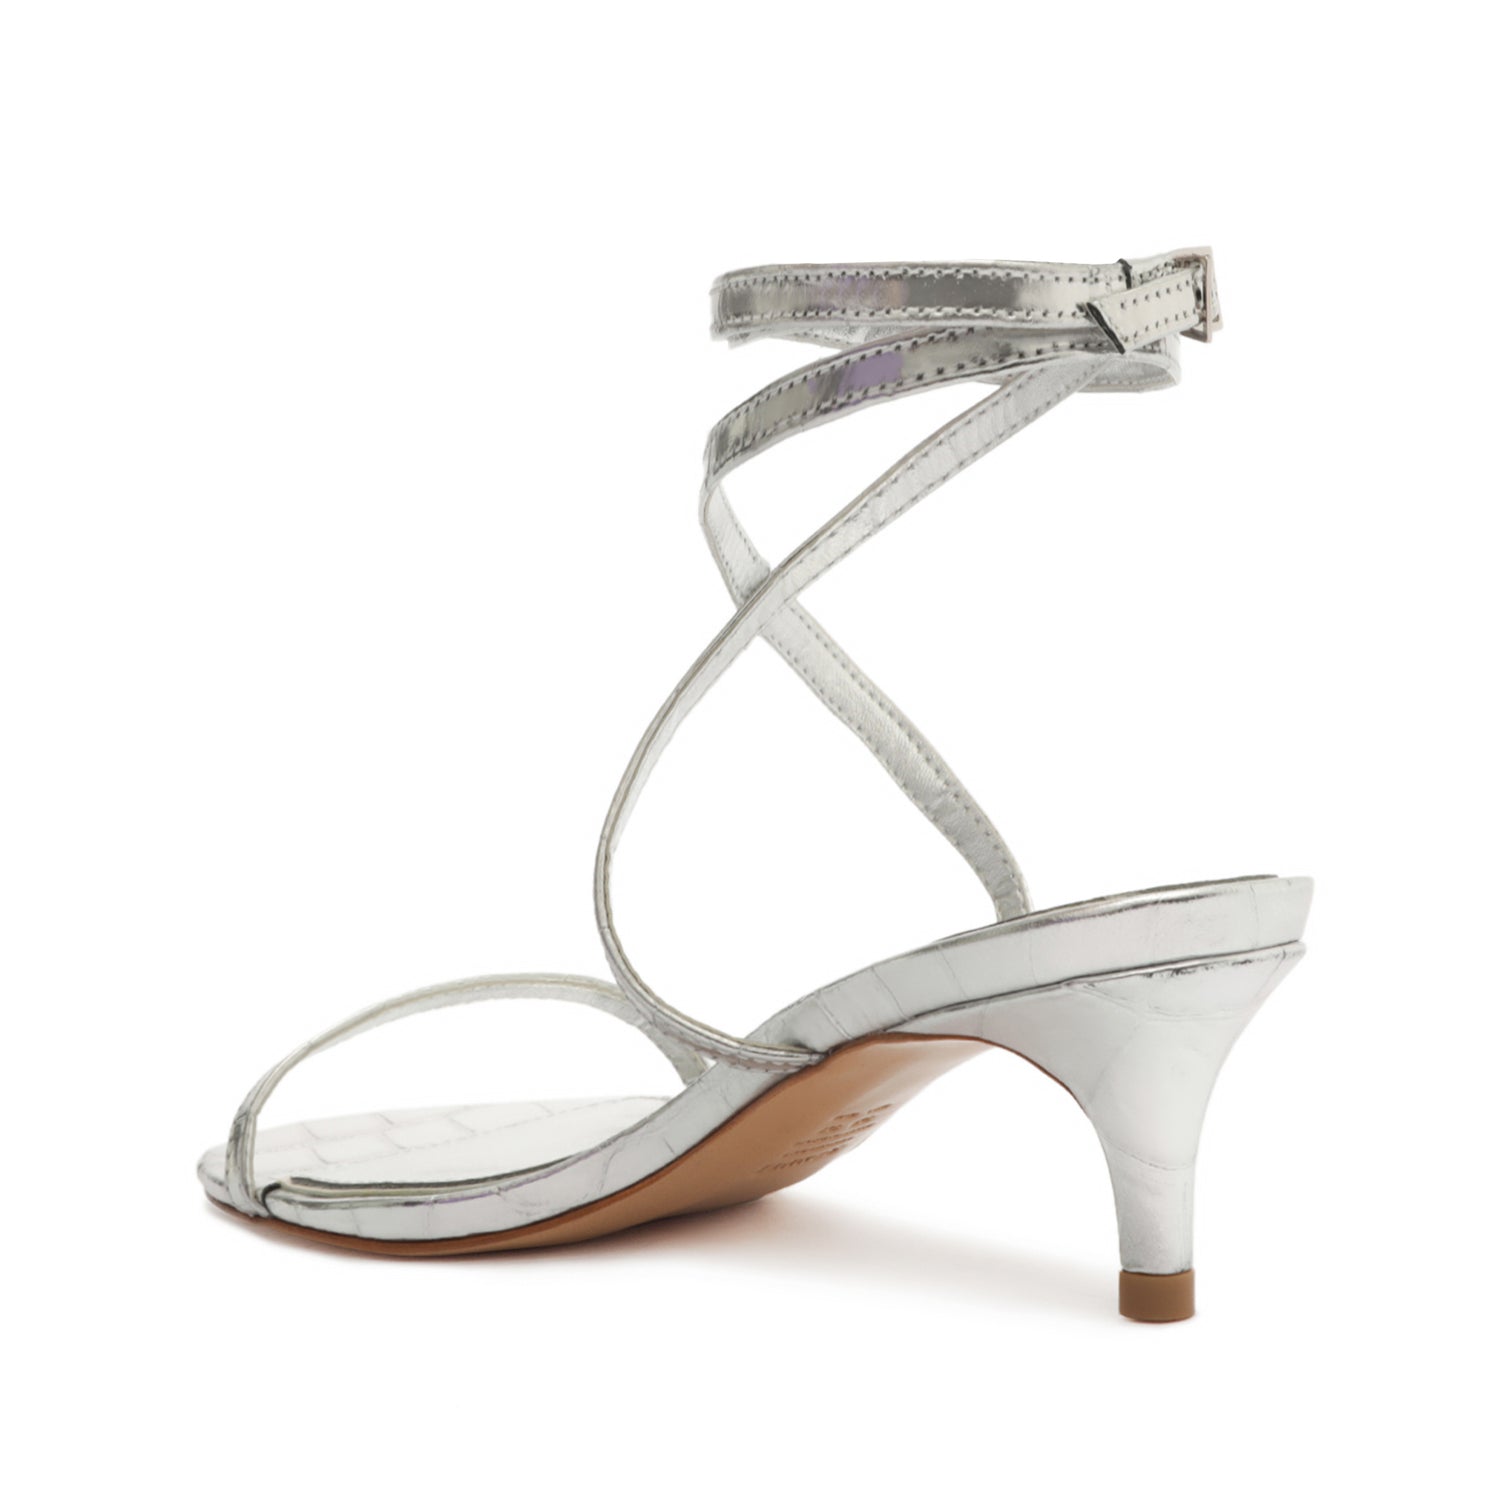 Sherry Leather Sandal Sandals FALL 23    - Schutz Shoes